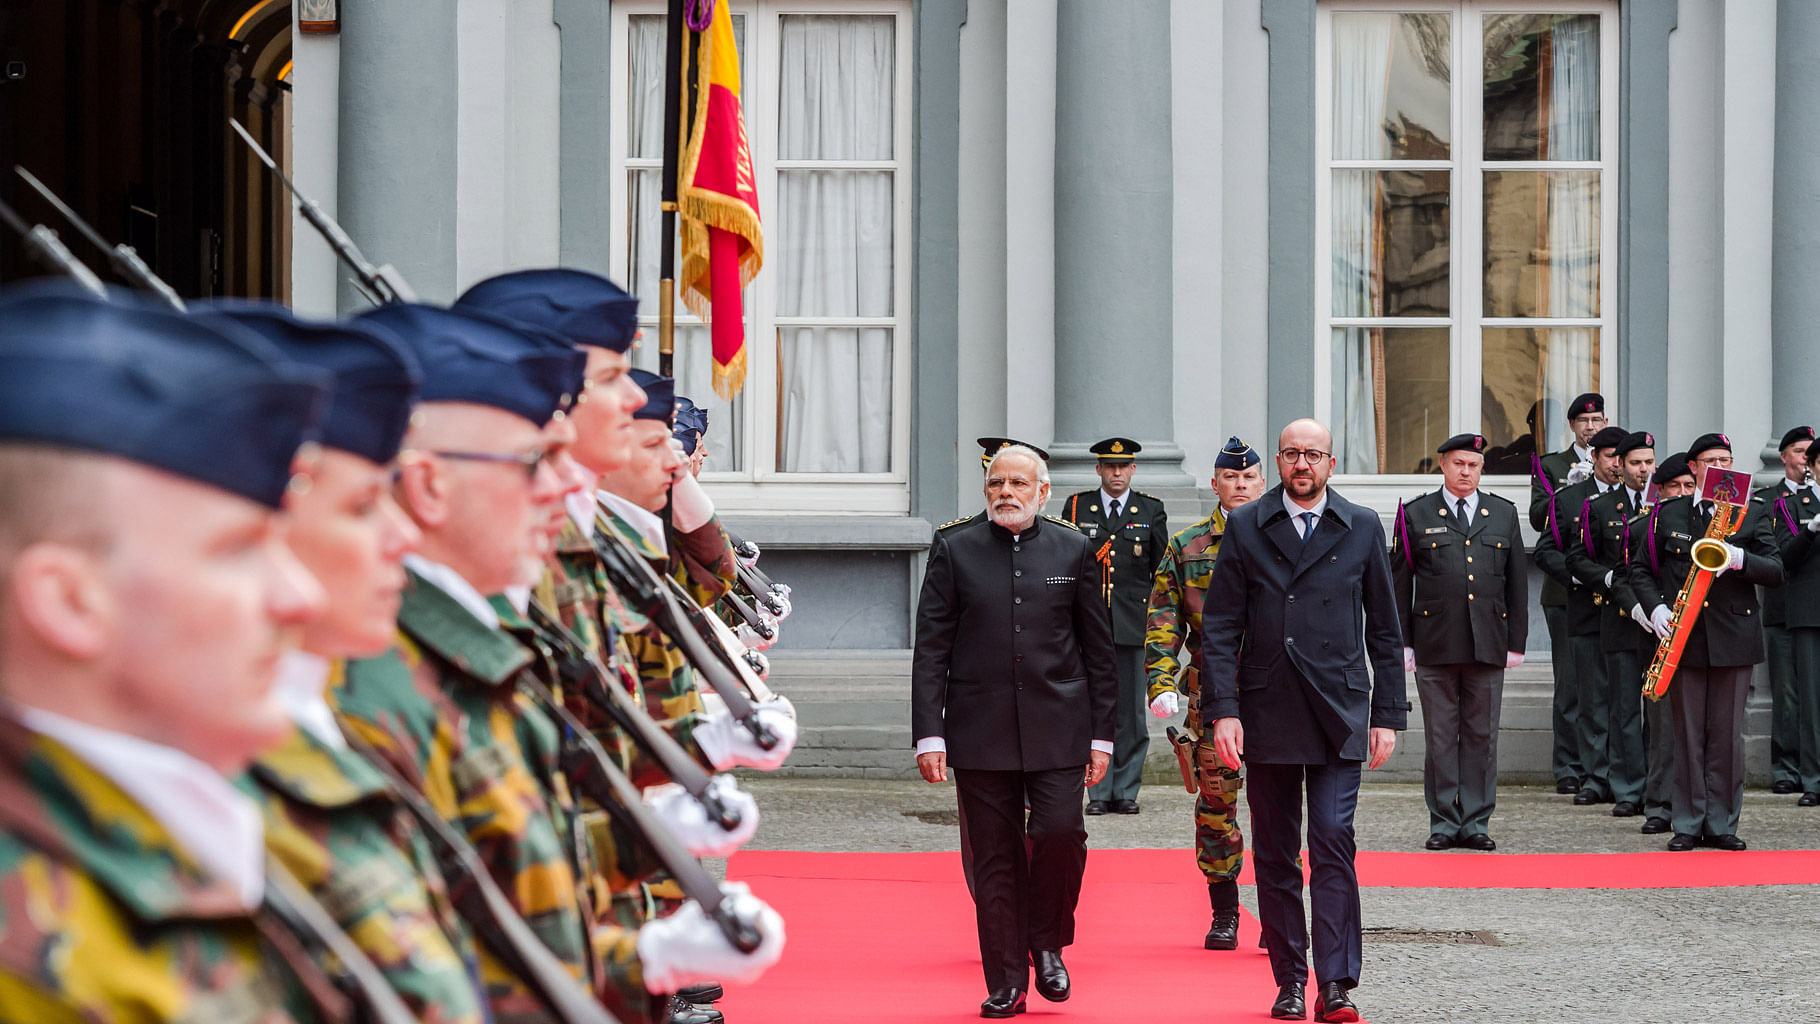 

Belgian  Prime Minister Charles Michel, right, and  Prime Minister Narendra Modi at a ceremonial guard of honour  prior to a meeting at the Egmont Palace in Brussels,  March 30, 2016. (Photo: AP)